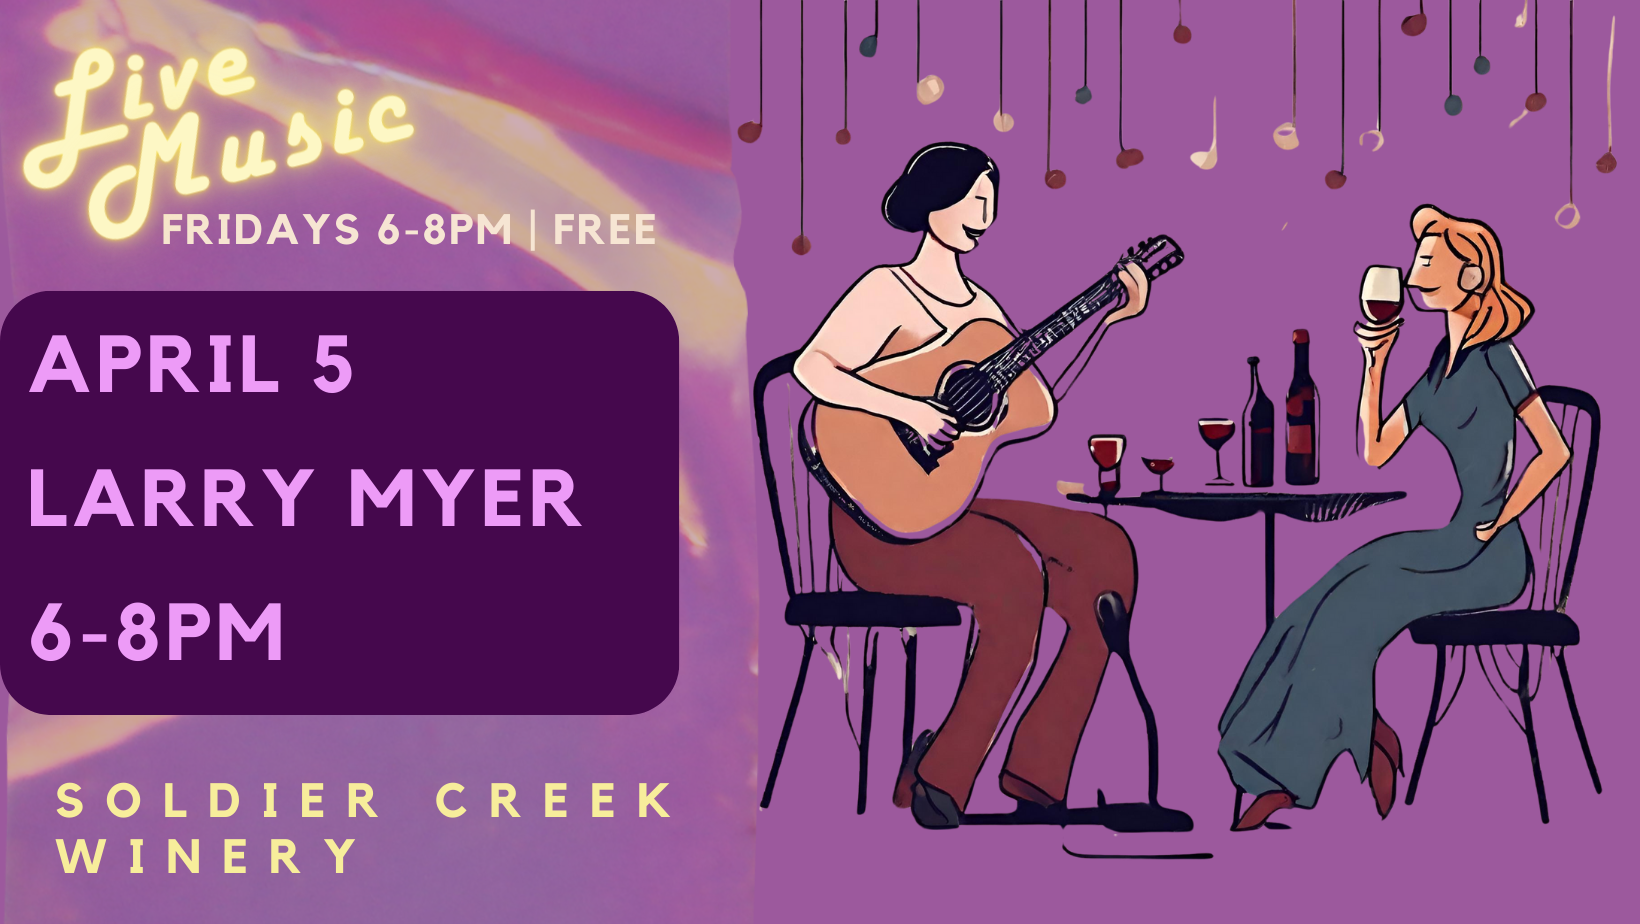 free, live music every friday at soldier creek winery. friday april 5 is larry myer from 6-8pm.